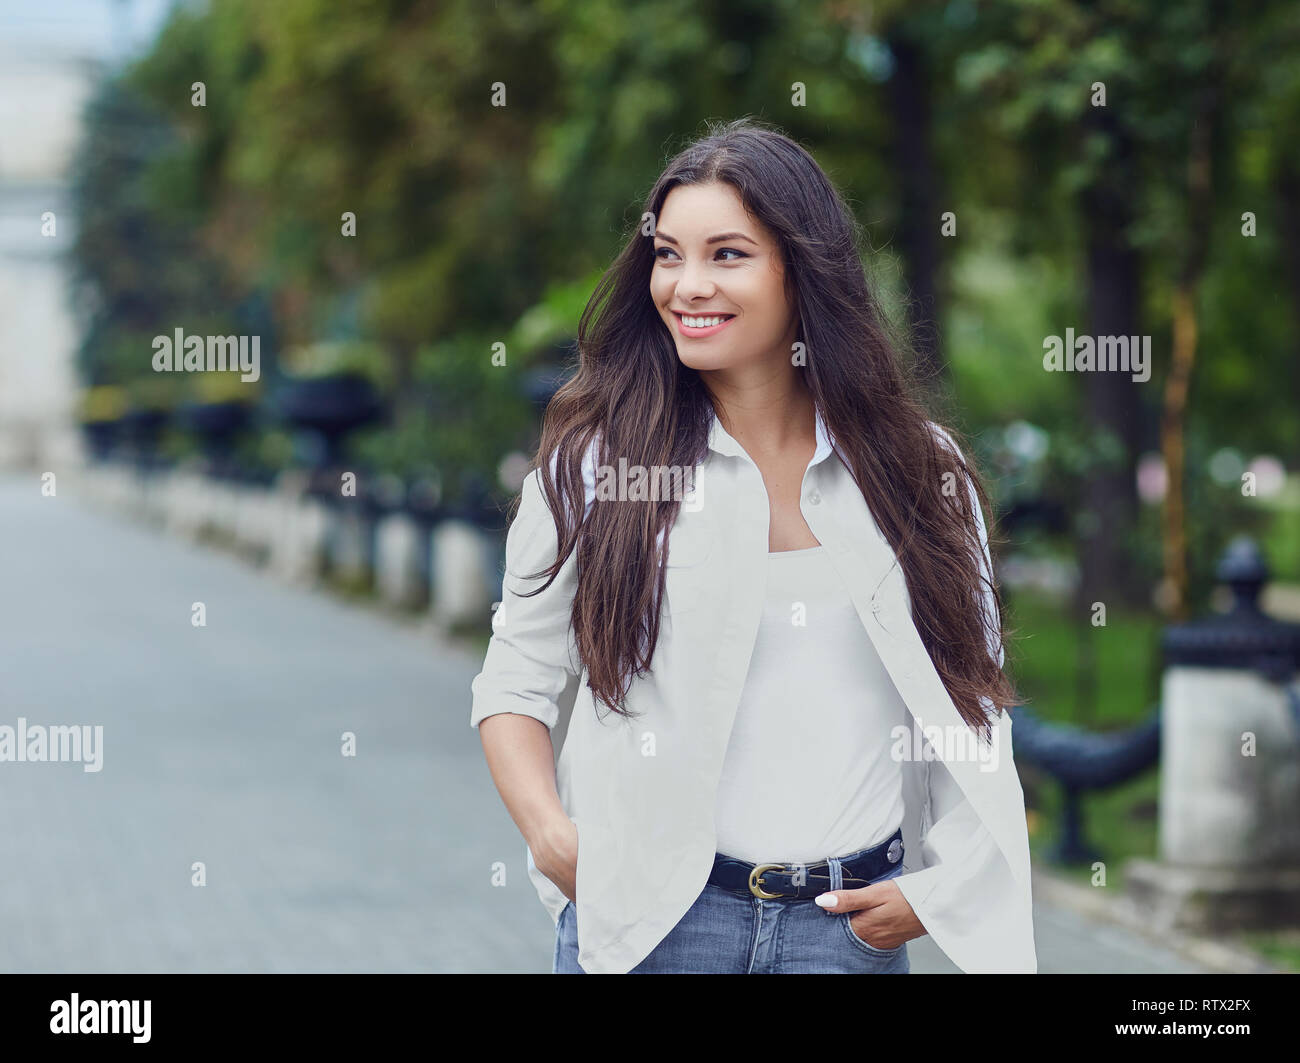 Beautiful happy brunette woman smiling outdoors.  Stock Photo